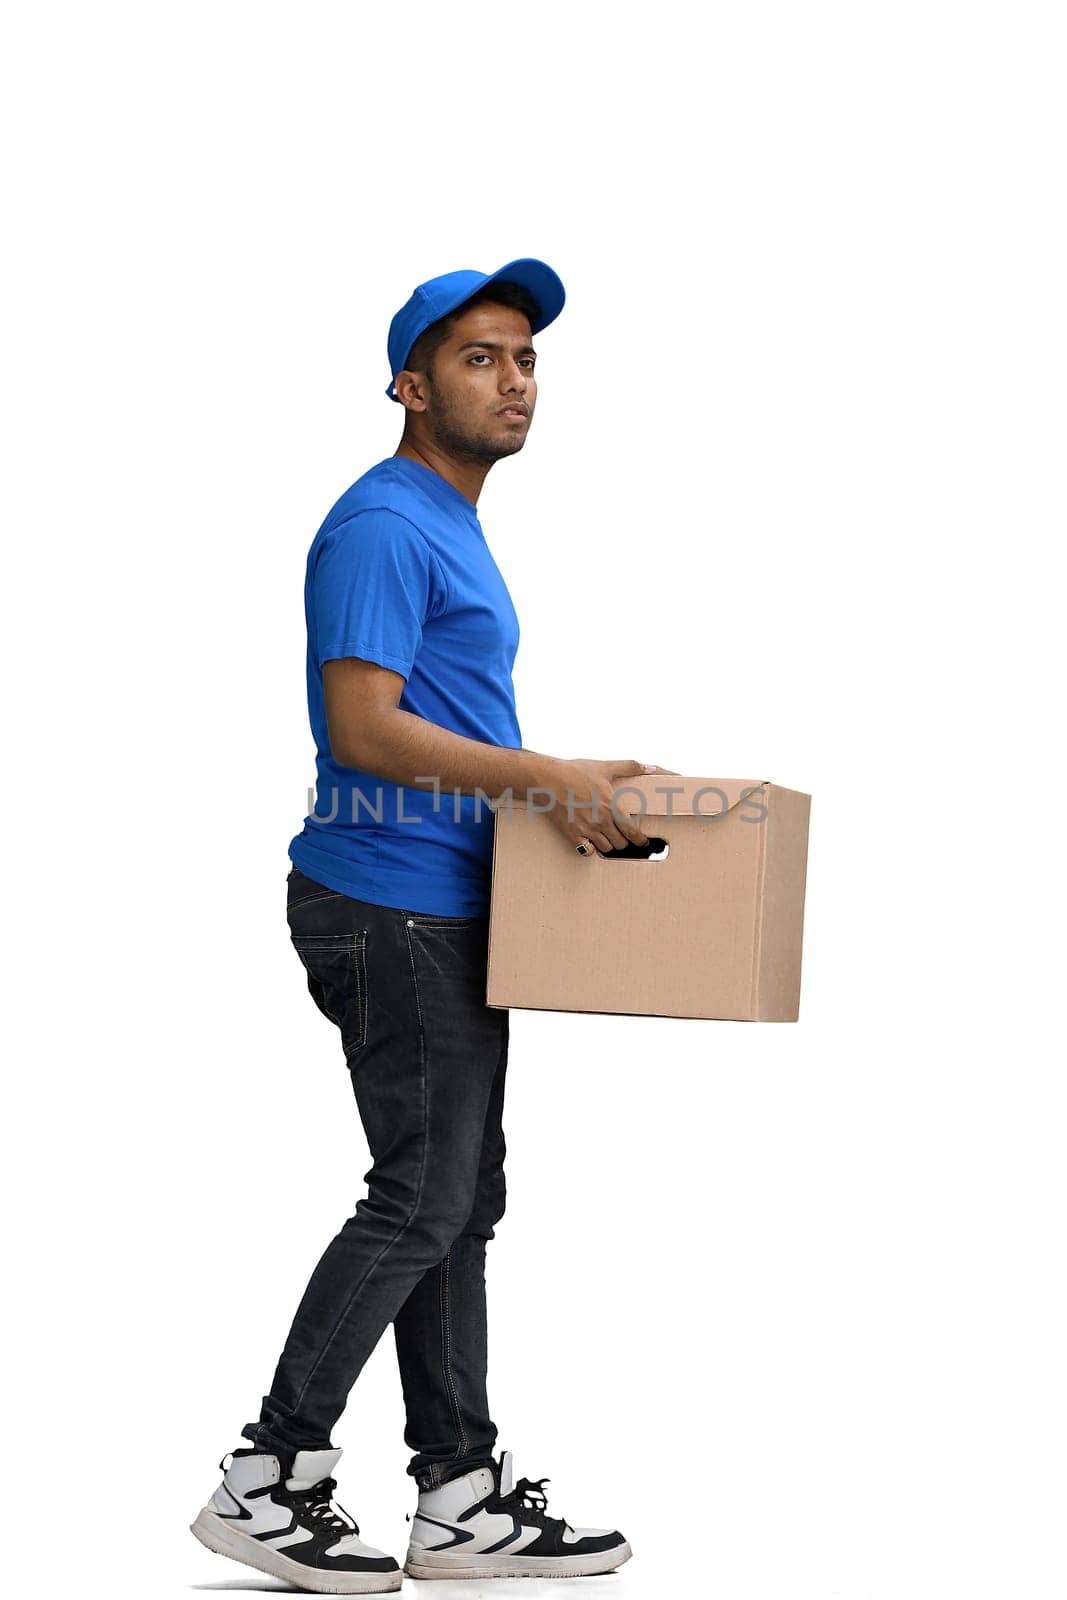 A man on a white background give box by Prosto